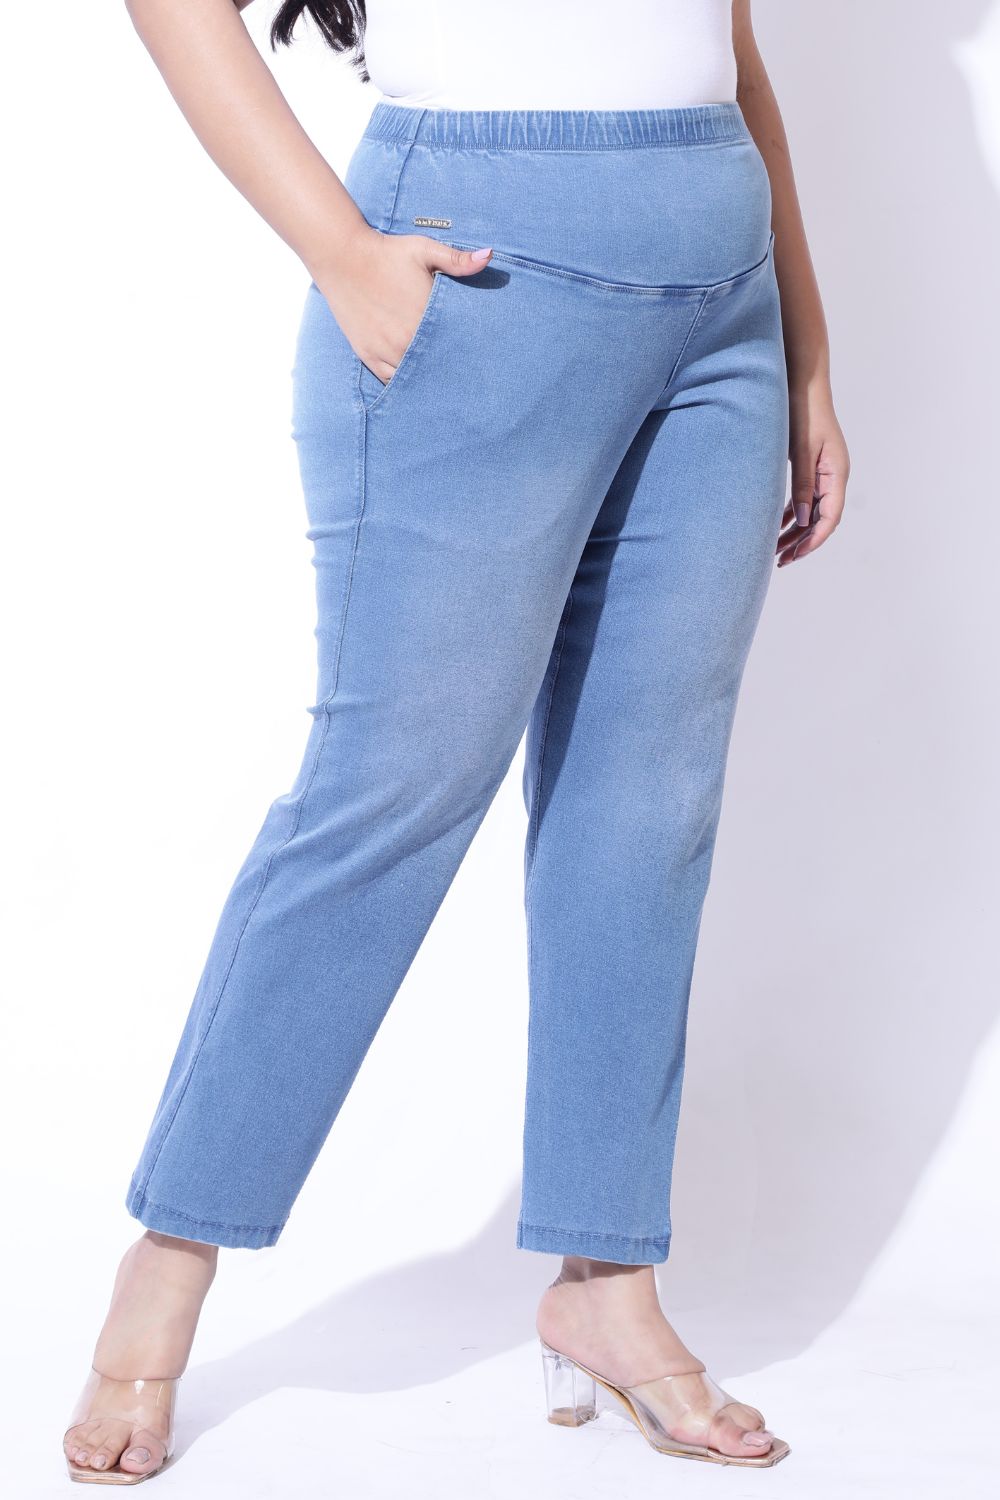 Buy Blue Light Fade Straight Fit Jeans